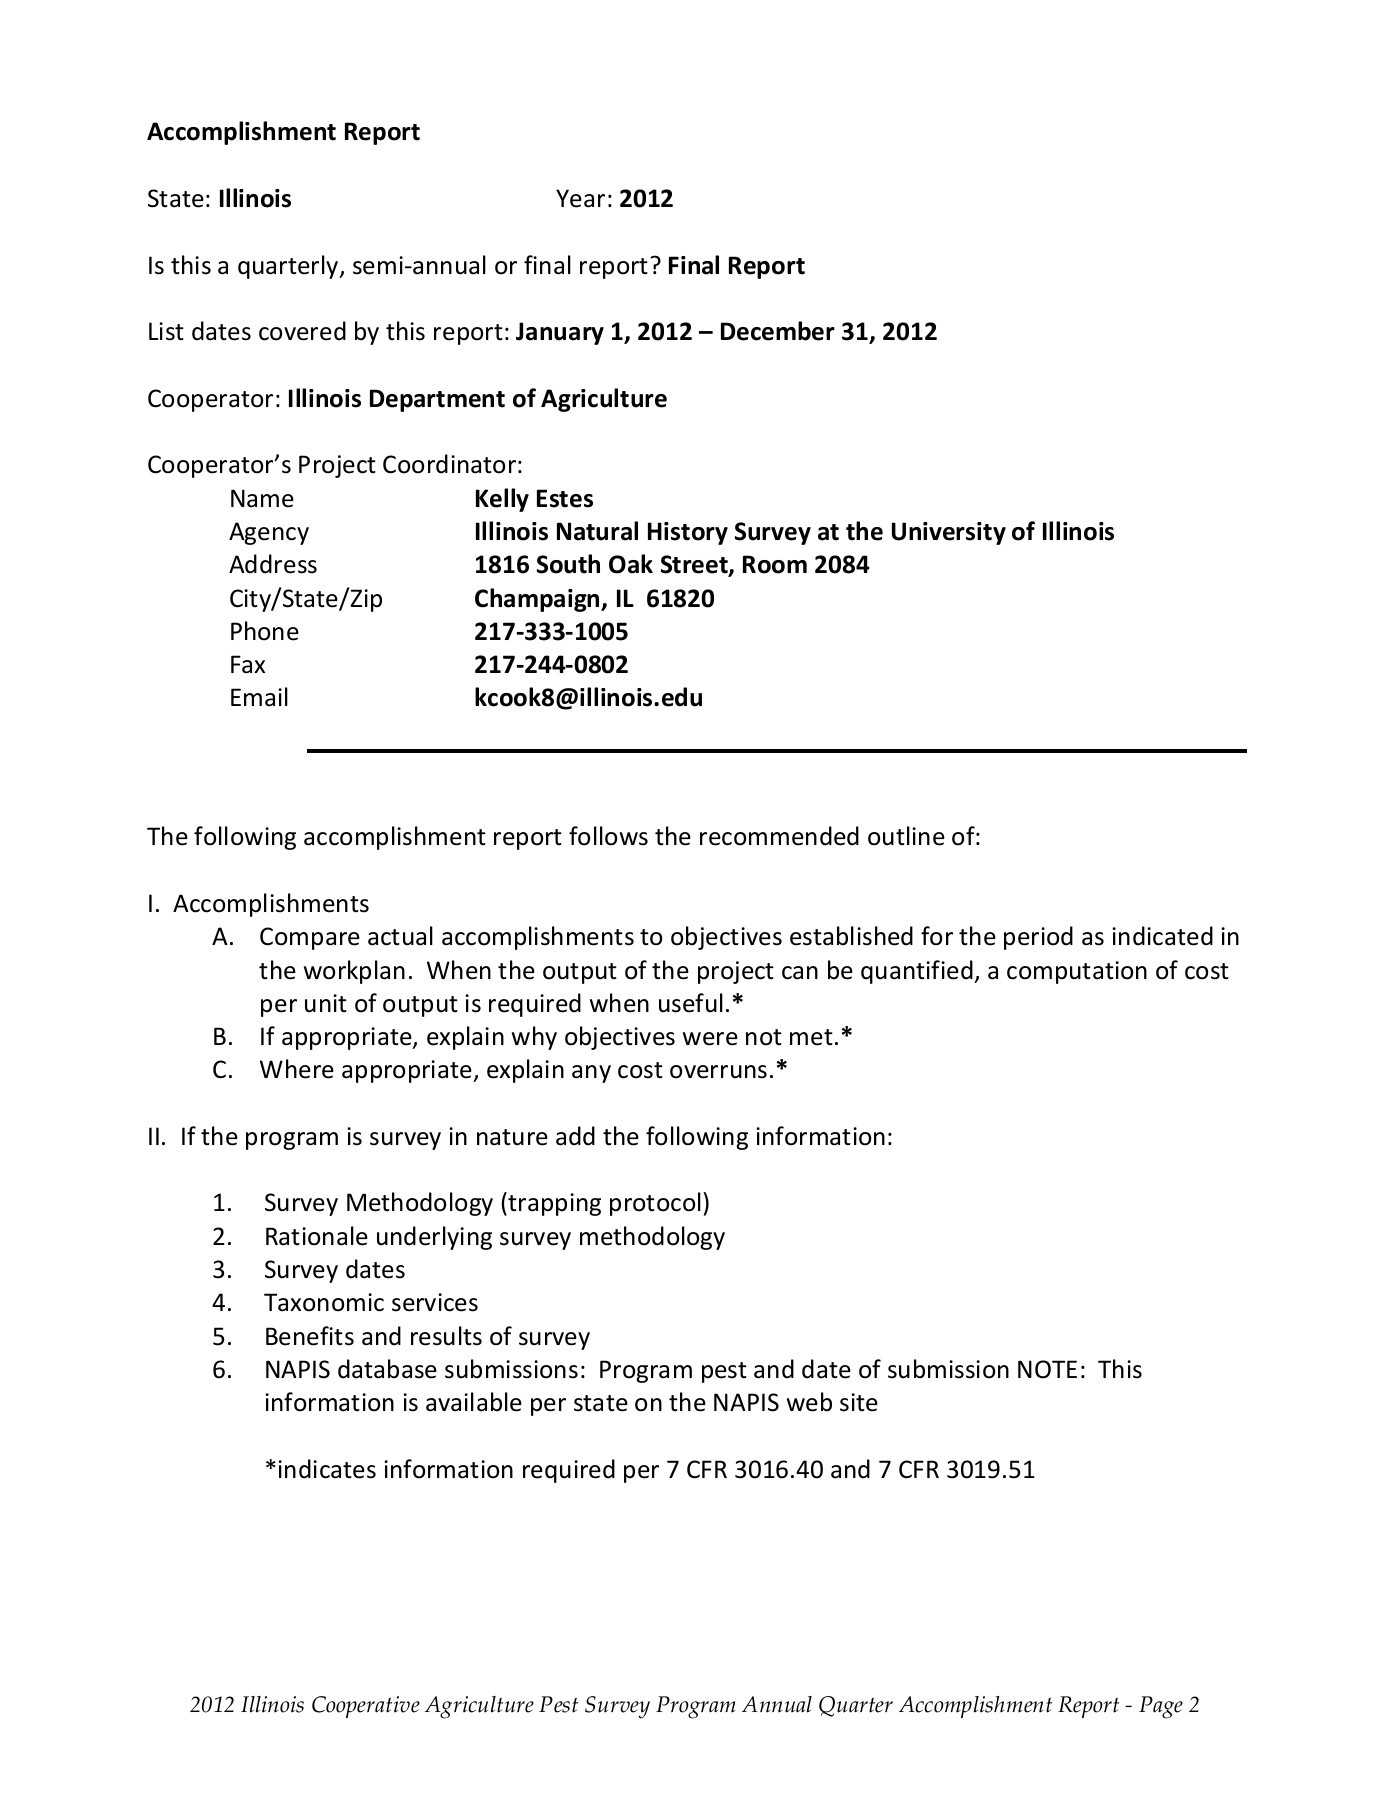 Accomplishment Report Format – Illinois Natural History Survy Intended For Weekly Accomplishment Report Template